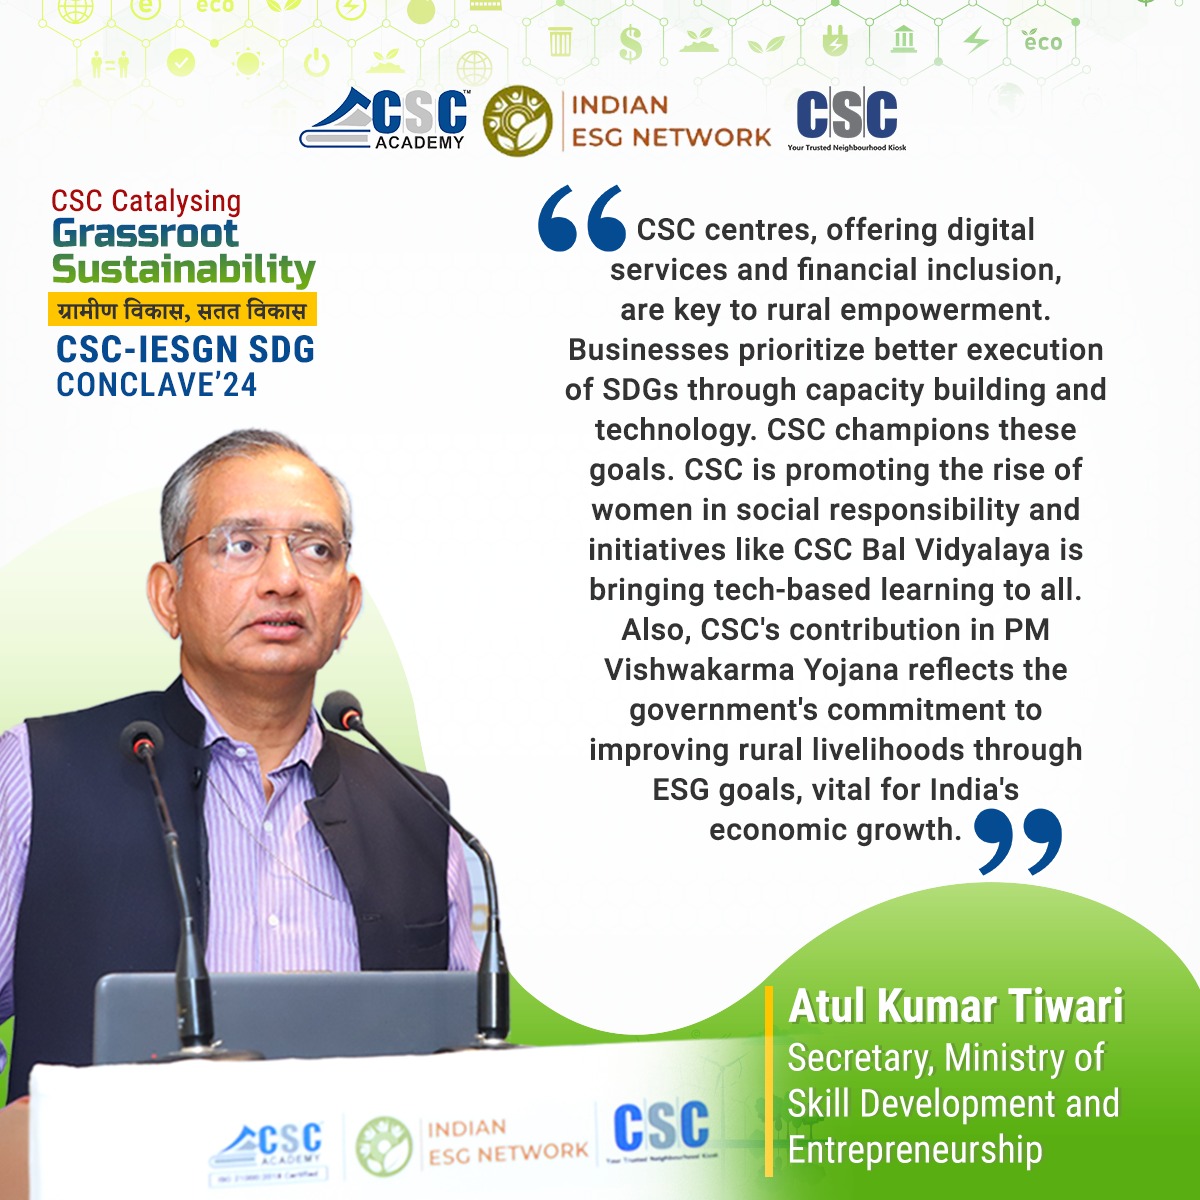 'CSC centres drive rural empowerment with digital services & financial inclusion, enhancing SDG efforts & women's roles in social responsibility. Initiatives like Bal Vidyalaya are pivotal in boosting India’s economic growth through ESG goals.'- Atul Kumar Tiwari, Secretary, MSDE